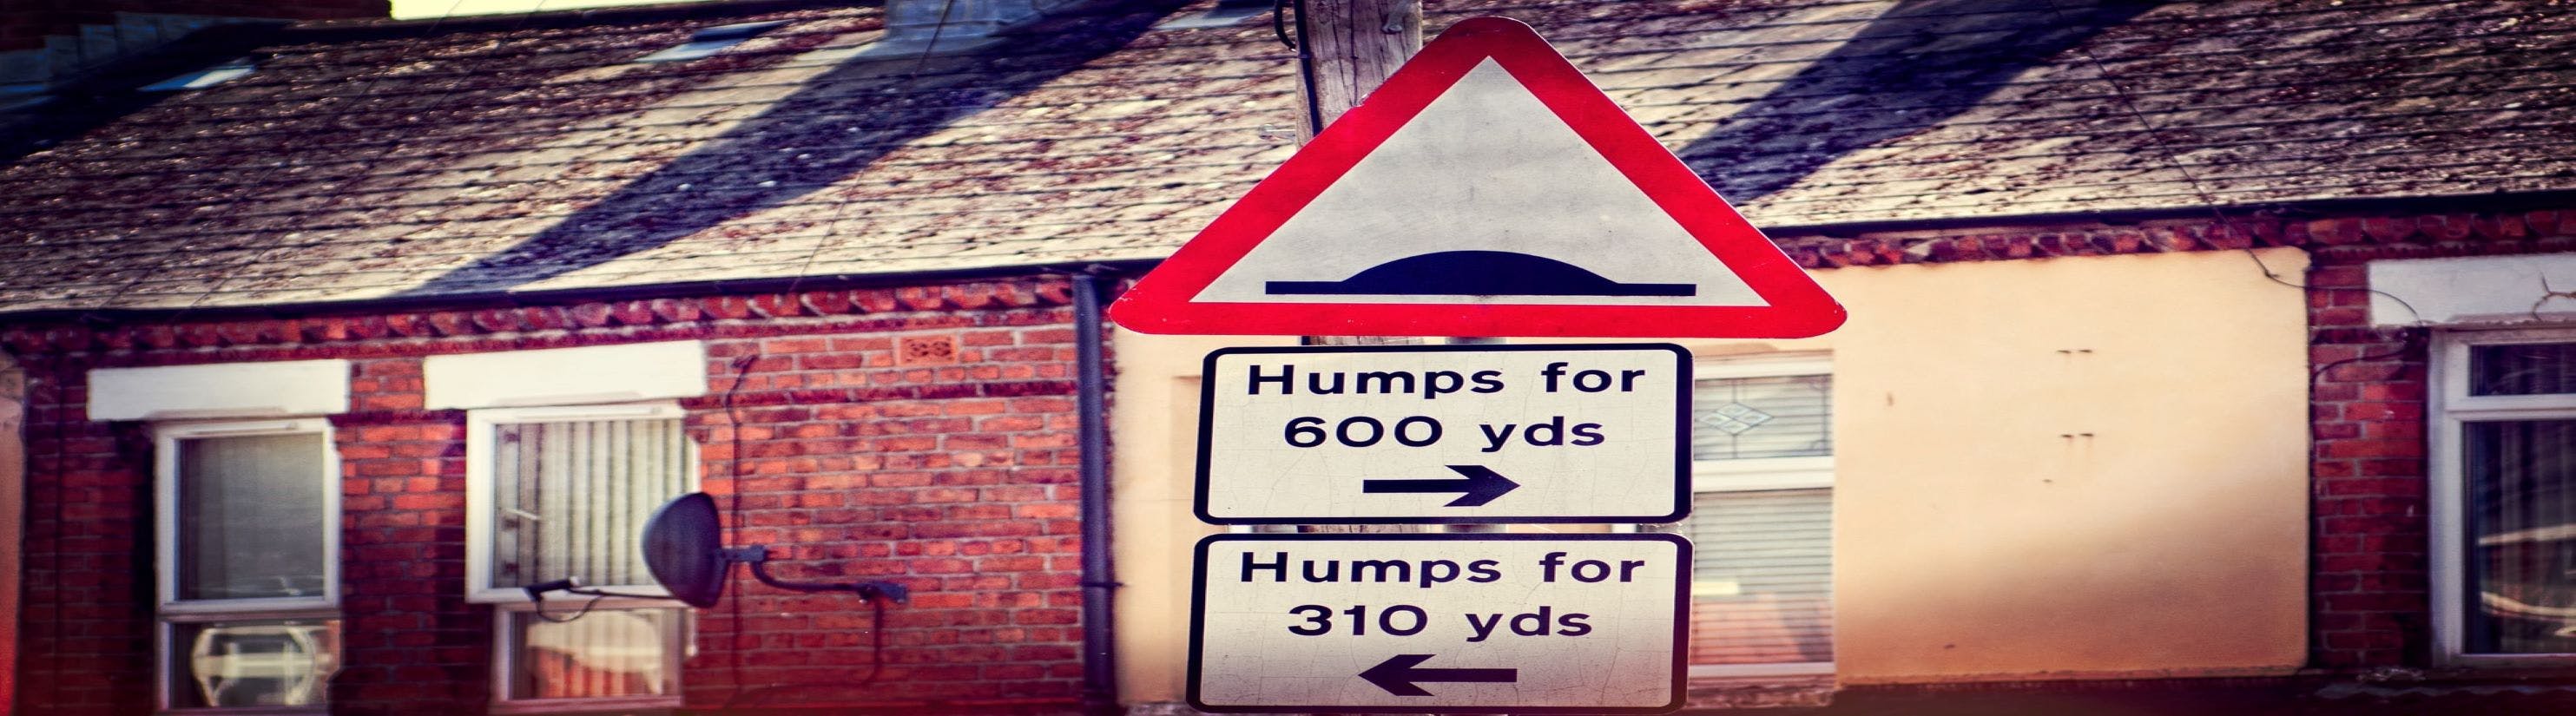 Photo of road signs warning of traffic humps.